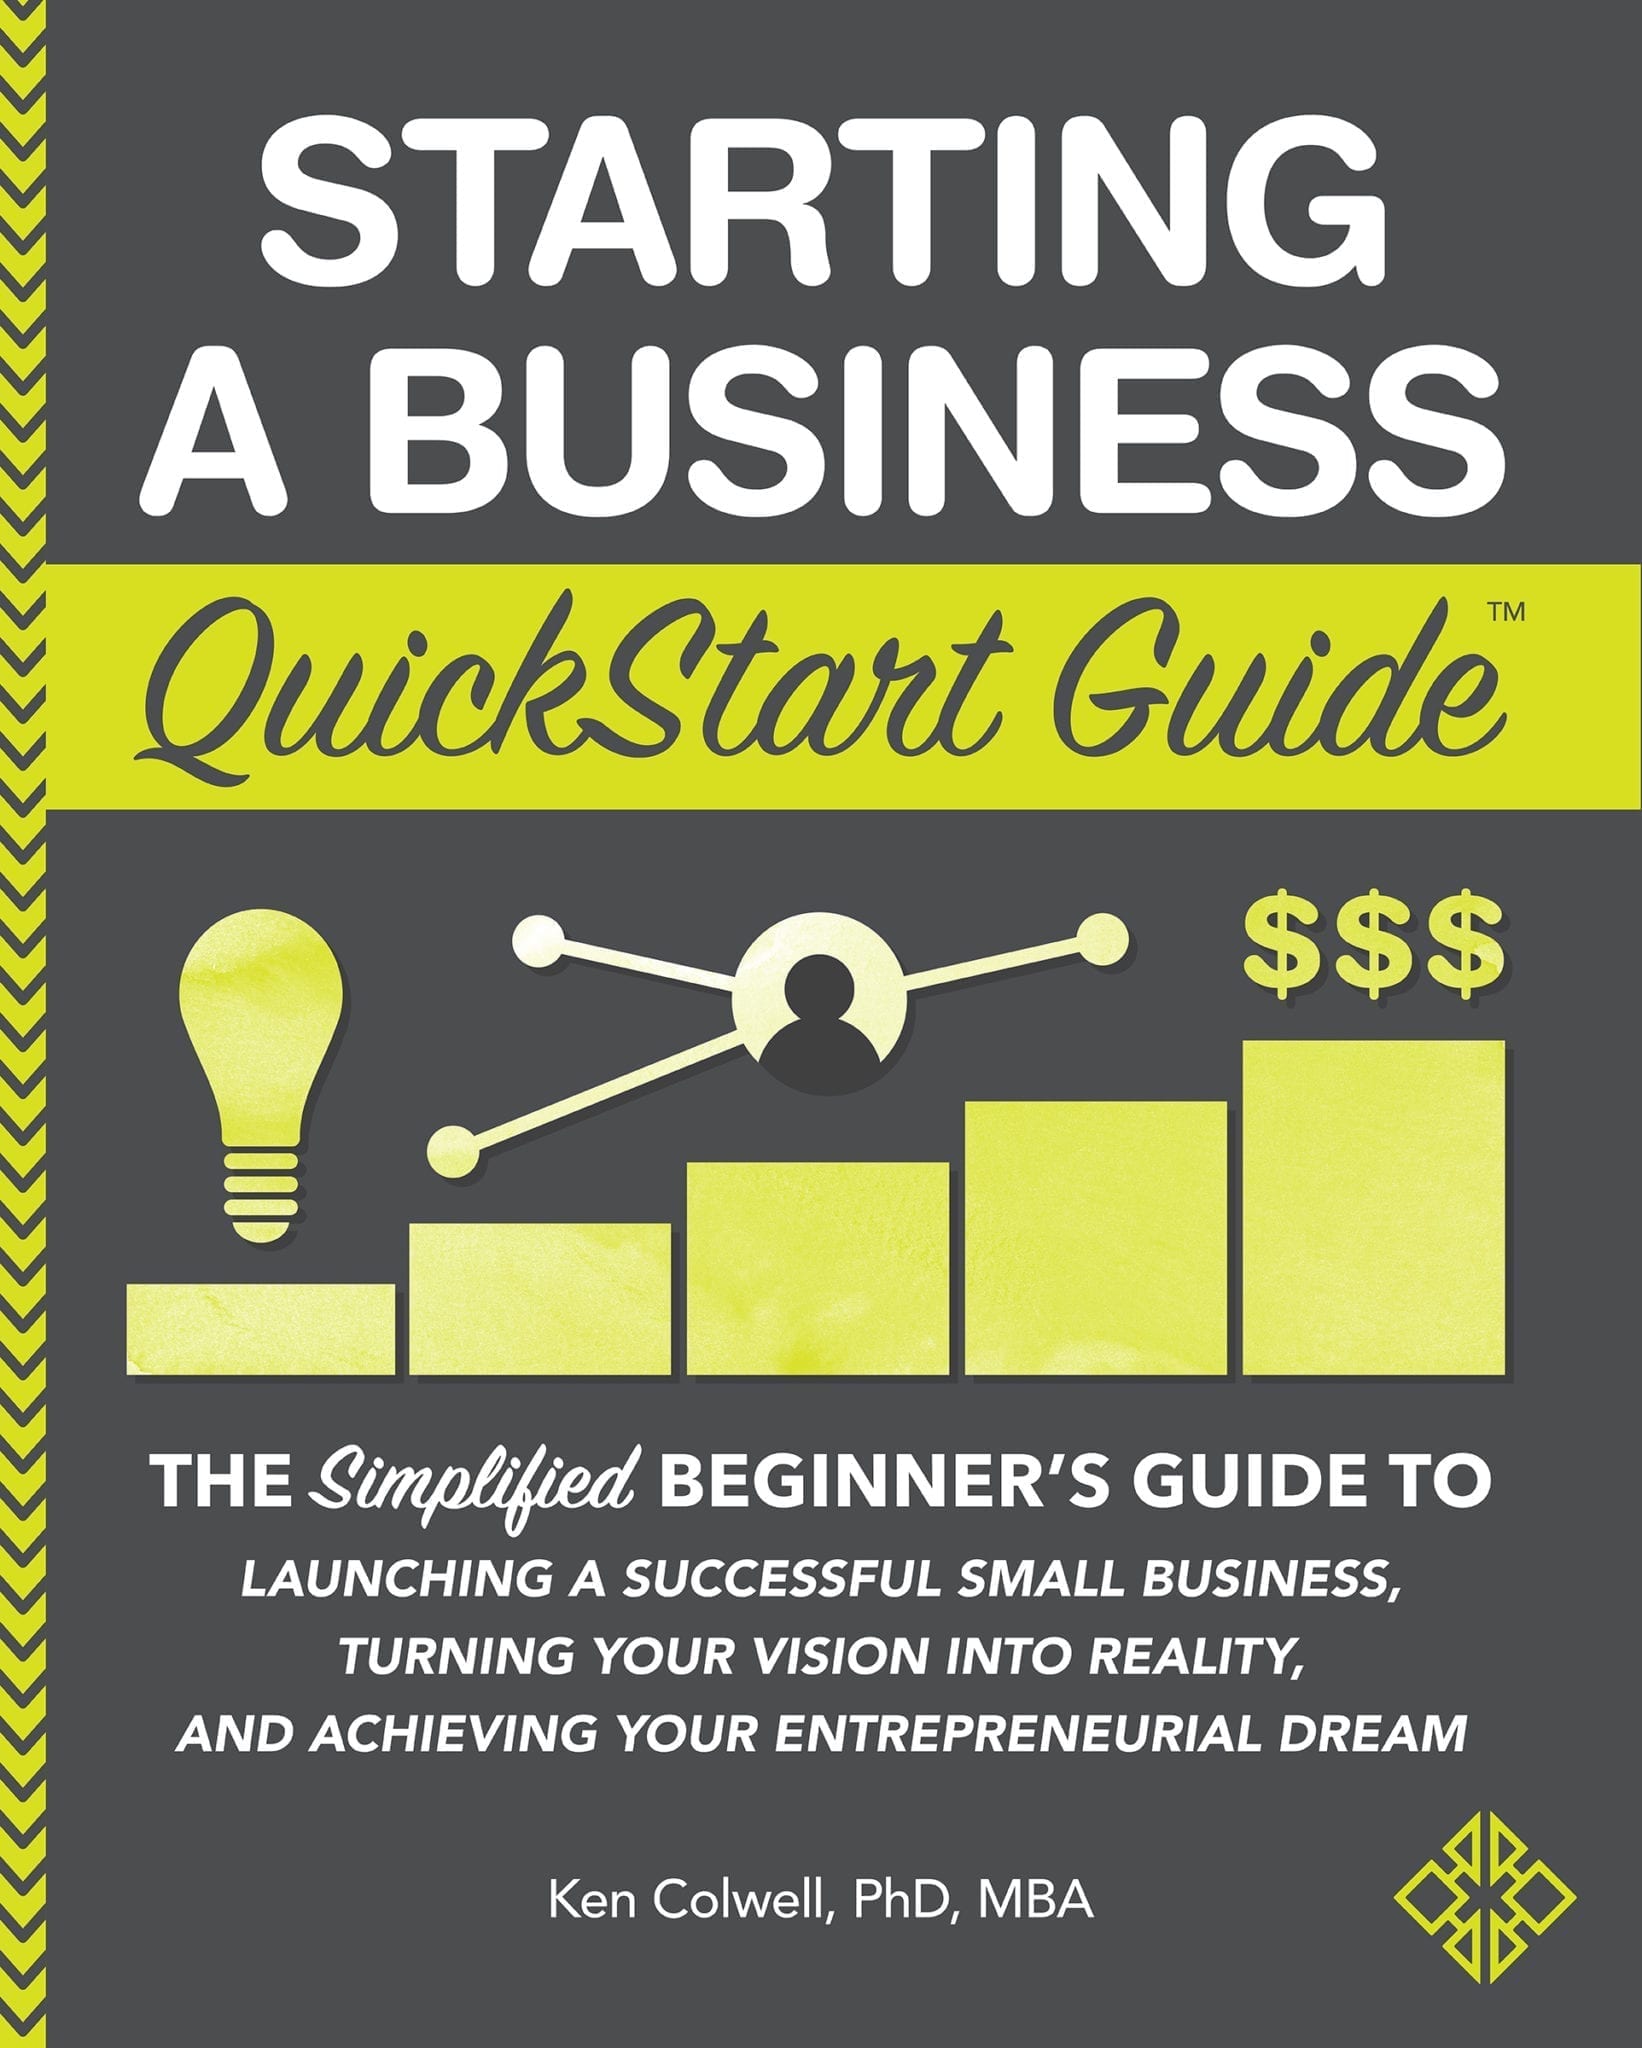 Starting a Business QuickStart Guide by Ken Colwell PhD, MBA